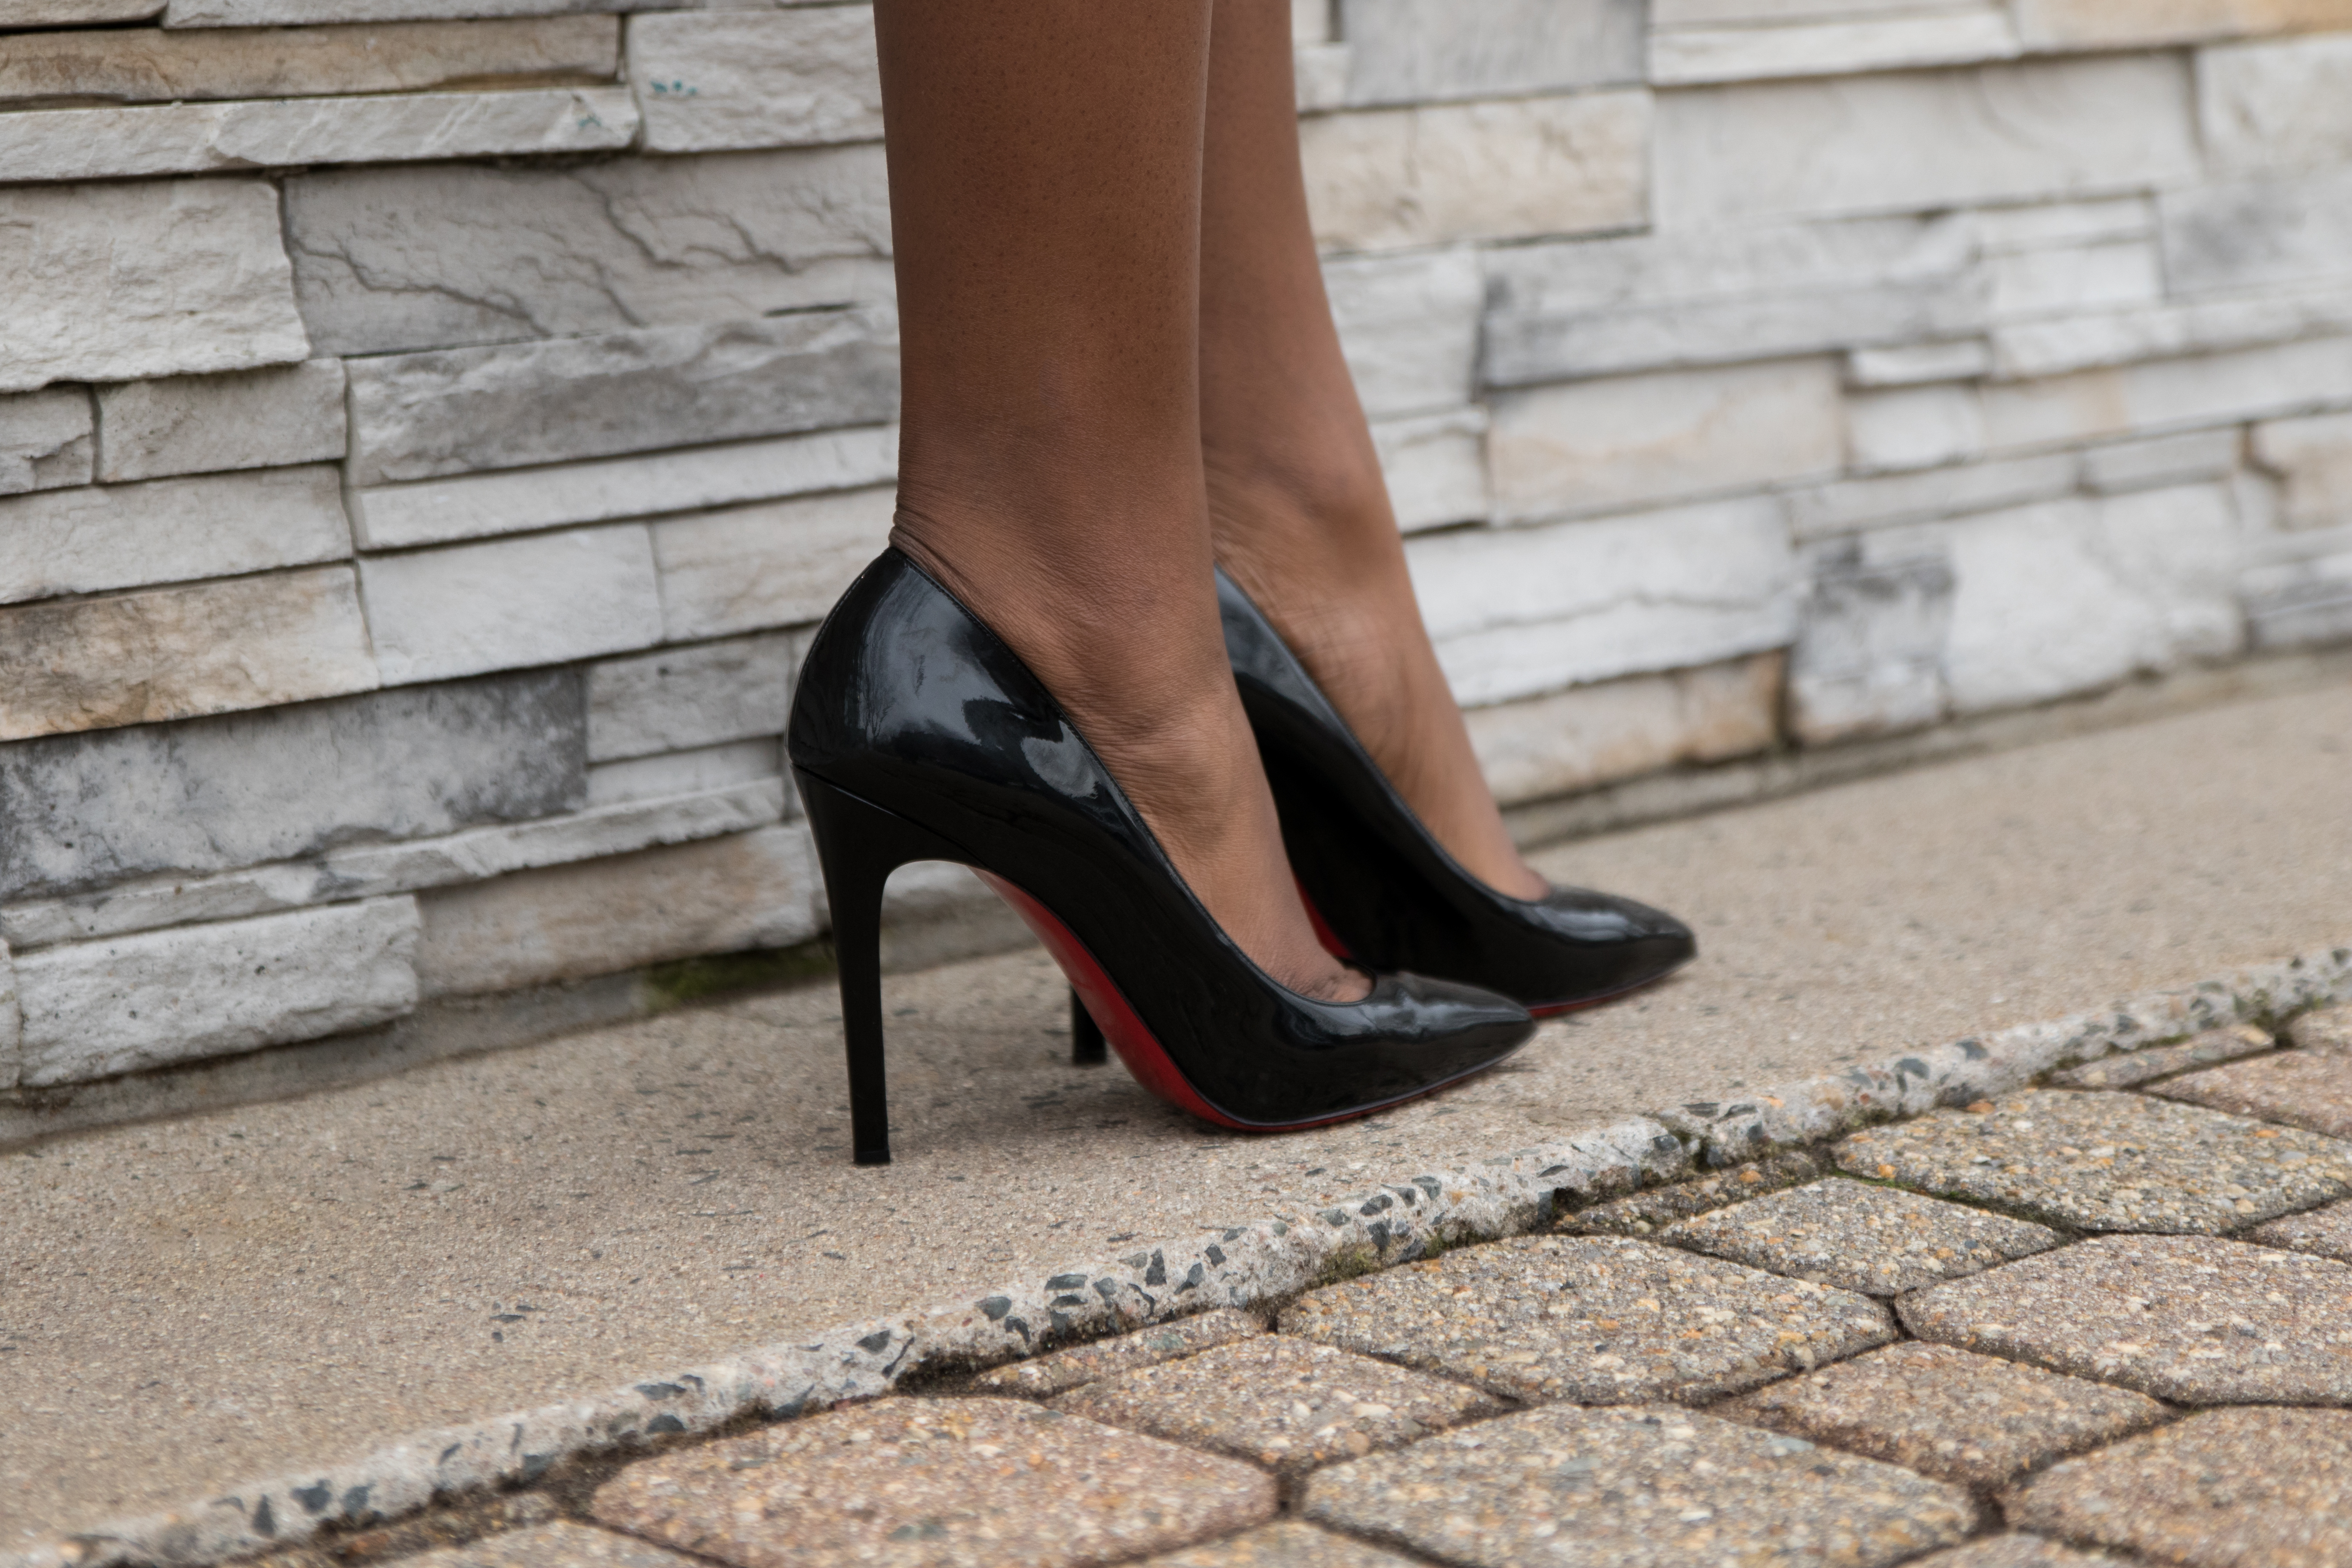 Christian Louboutin Pigalle 100mm | Yours Truly Yinka by Olayinka ...